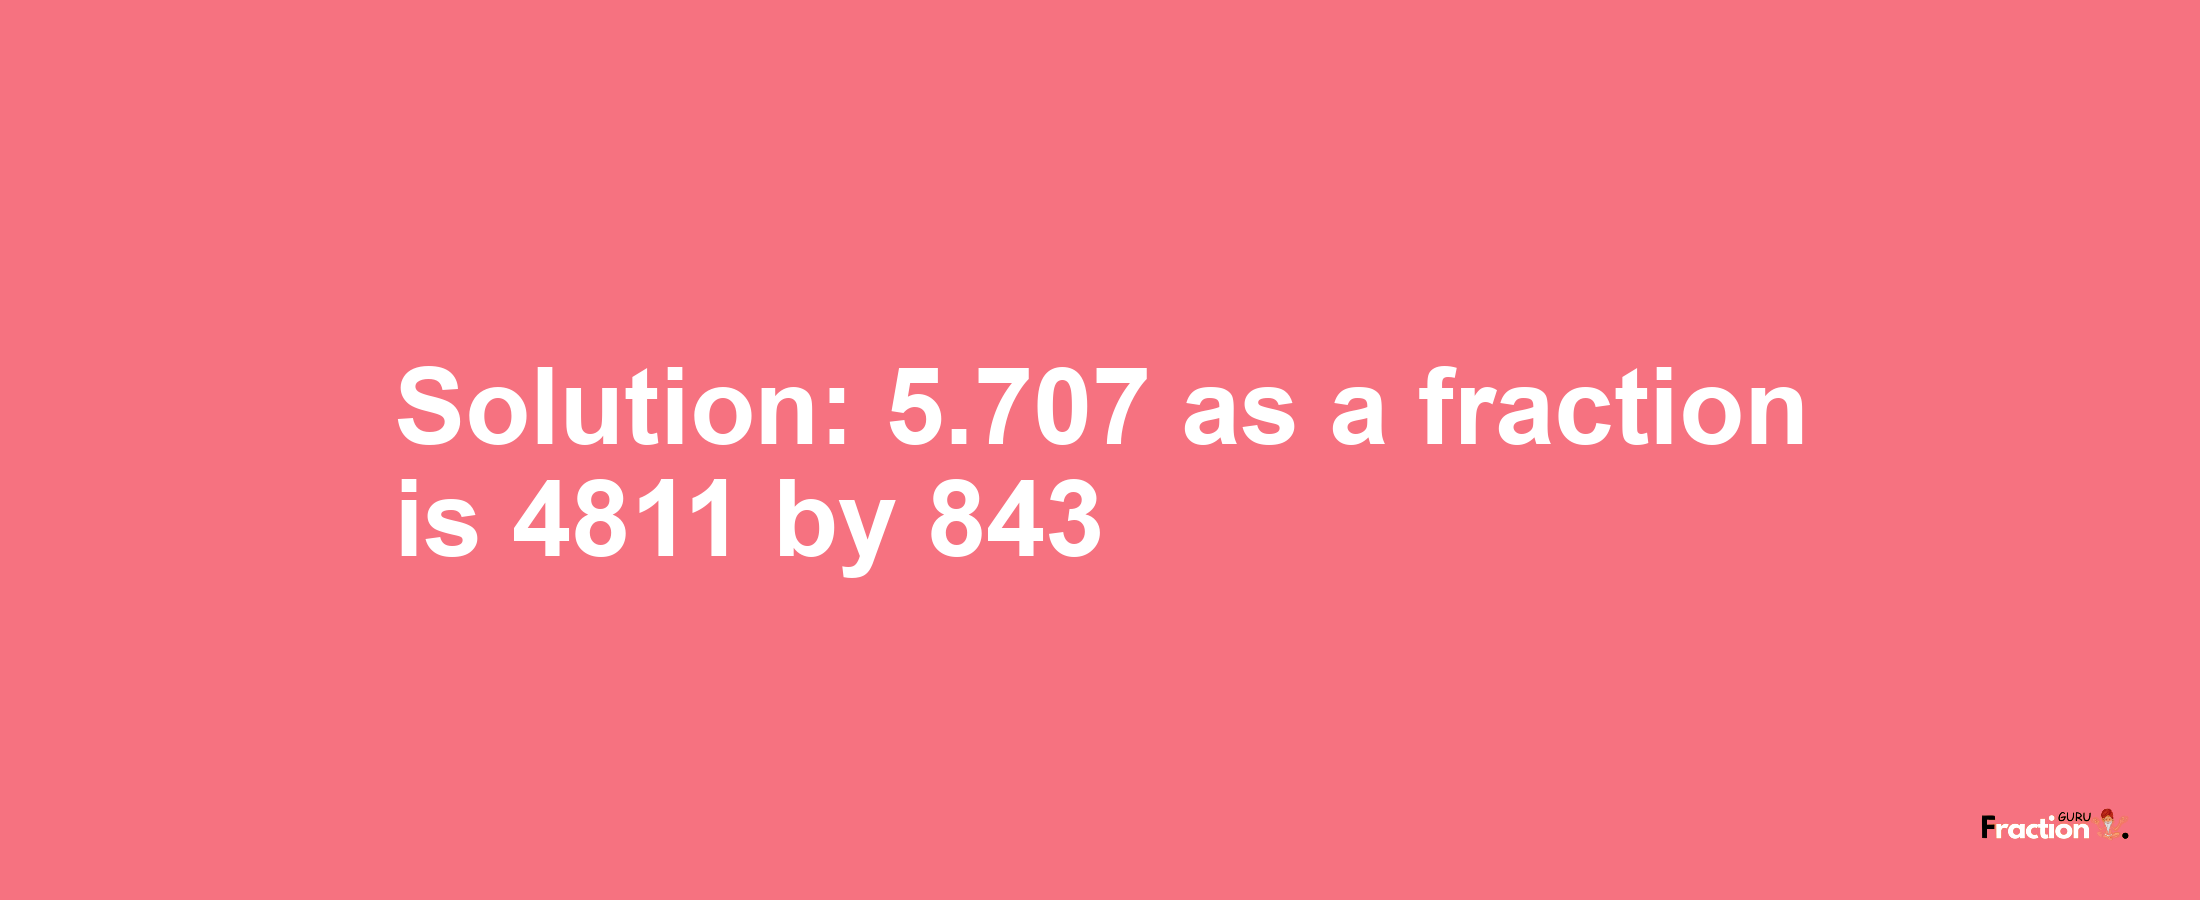 Solution:5.707 as a fraction is 4811/843